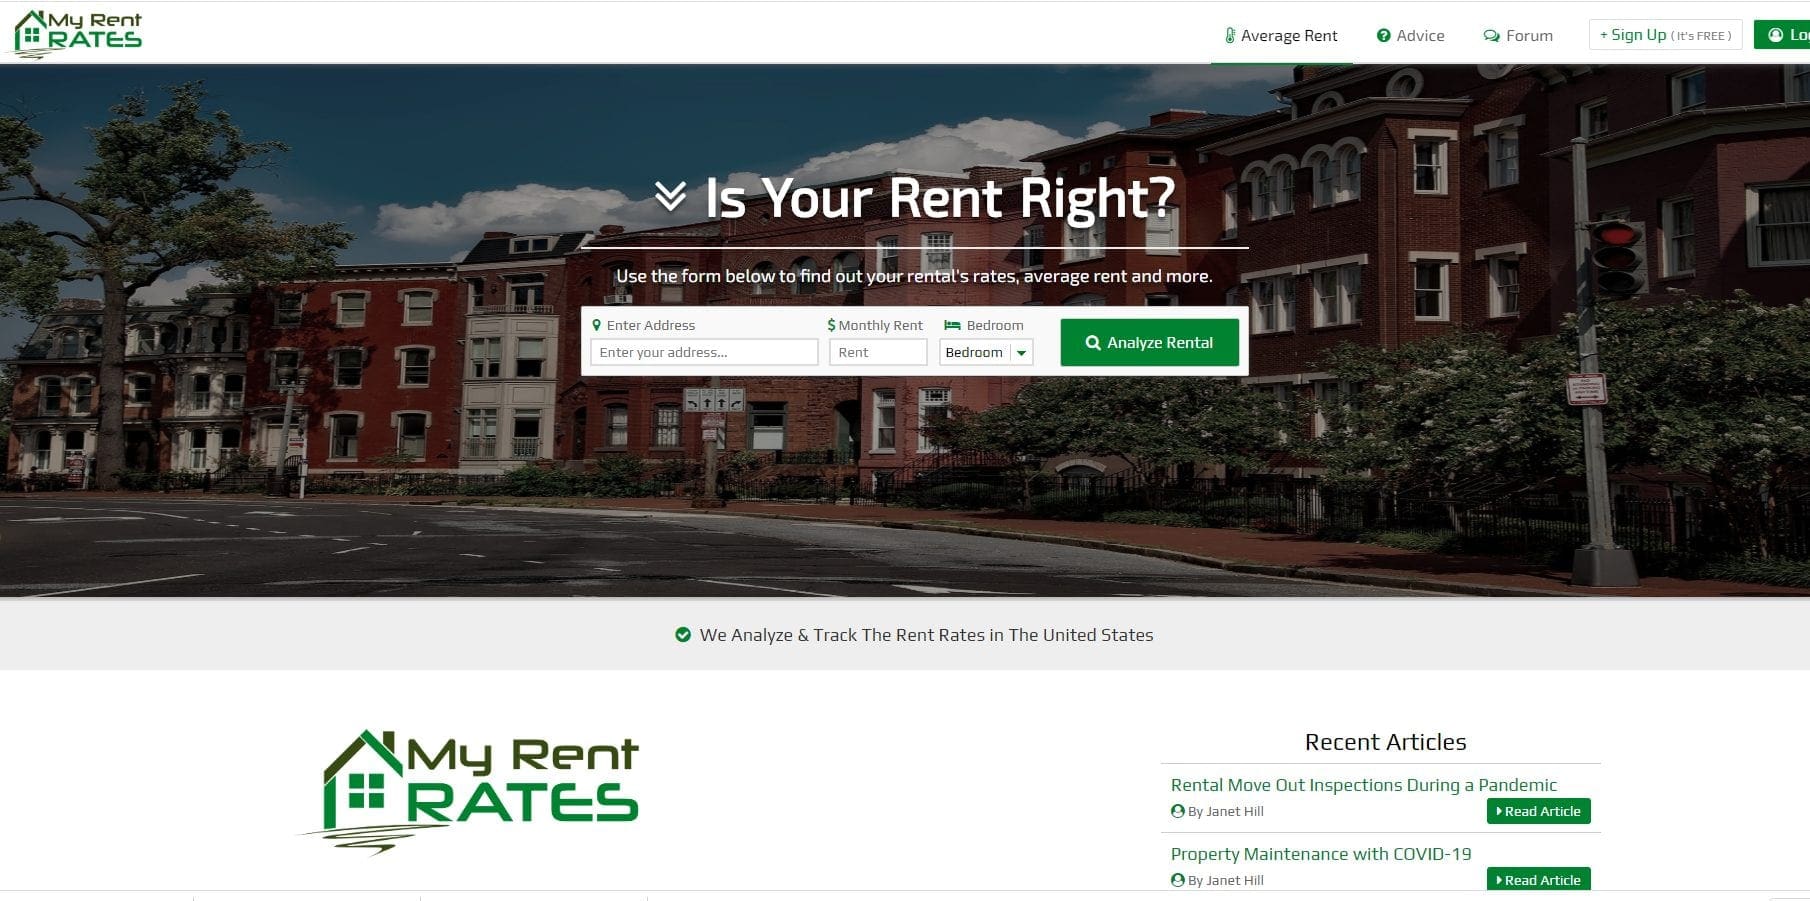 My rent rates screenshot of the home page